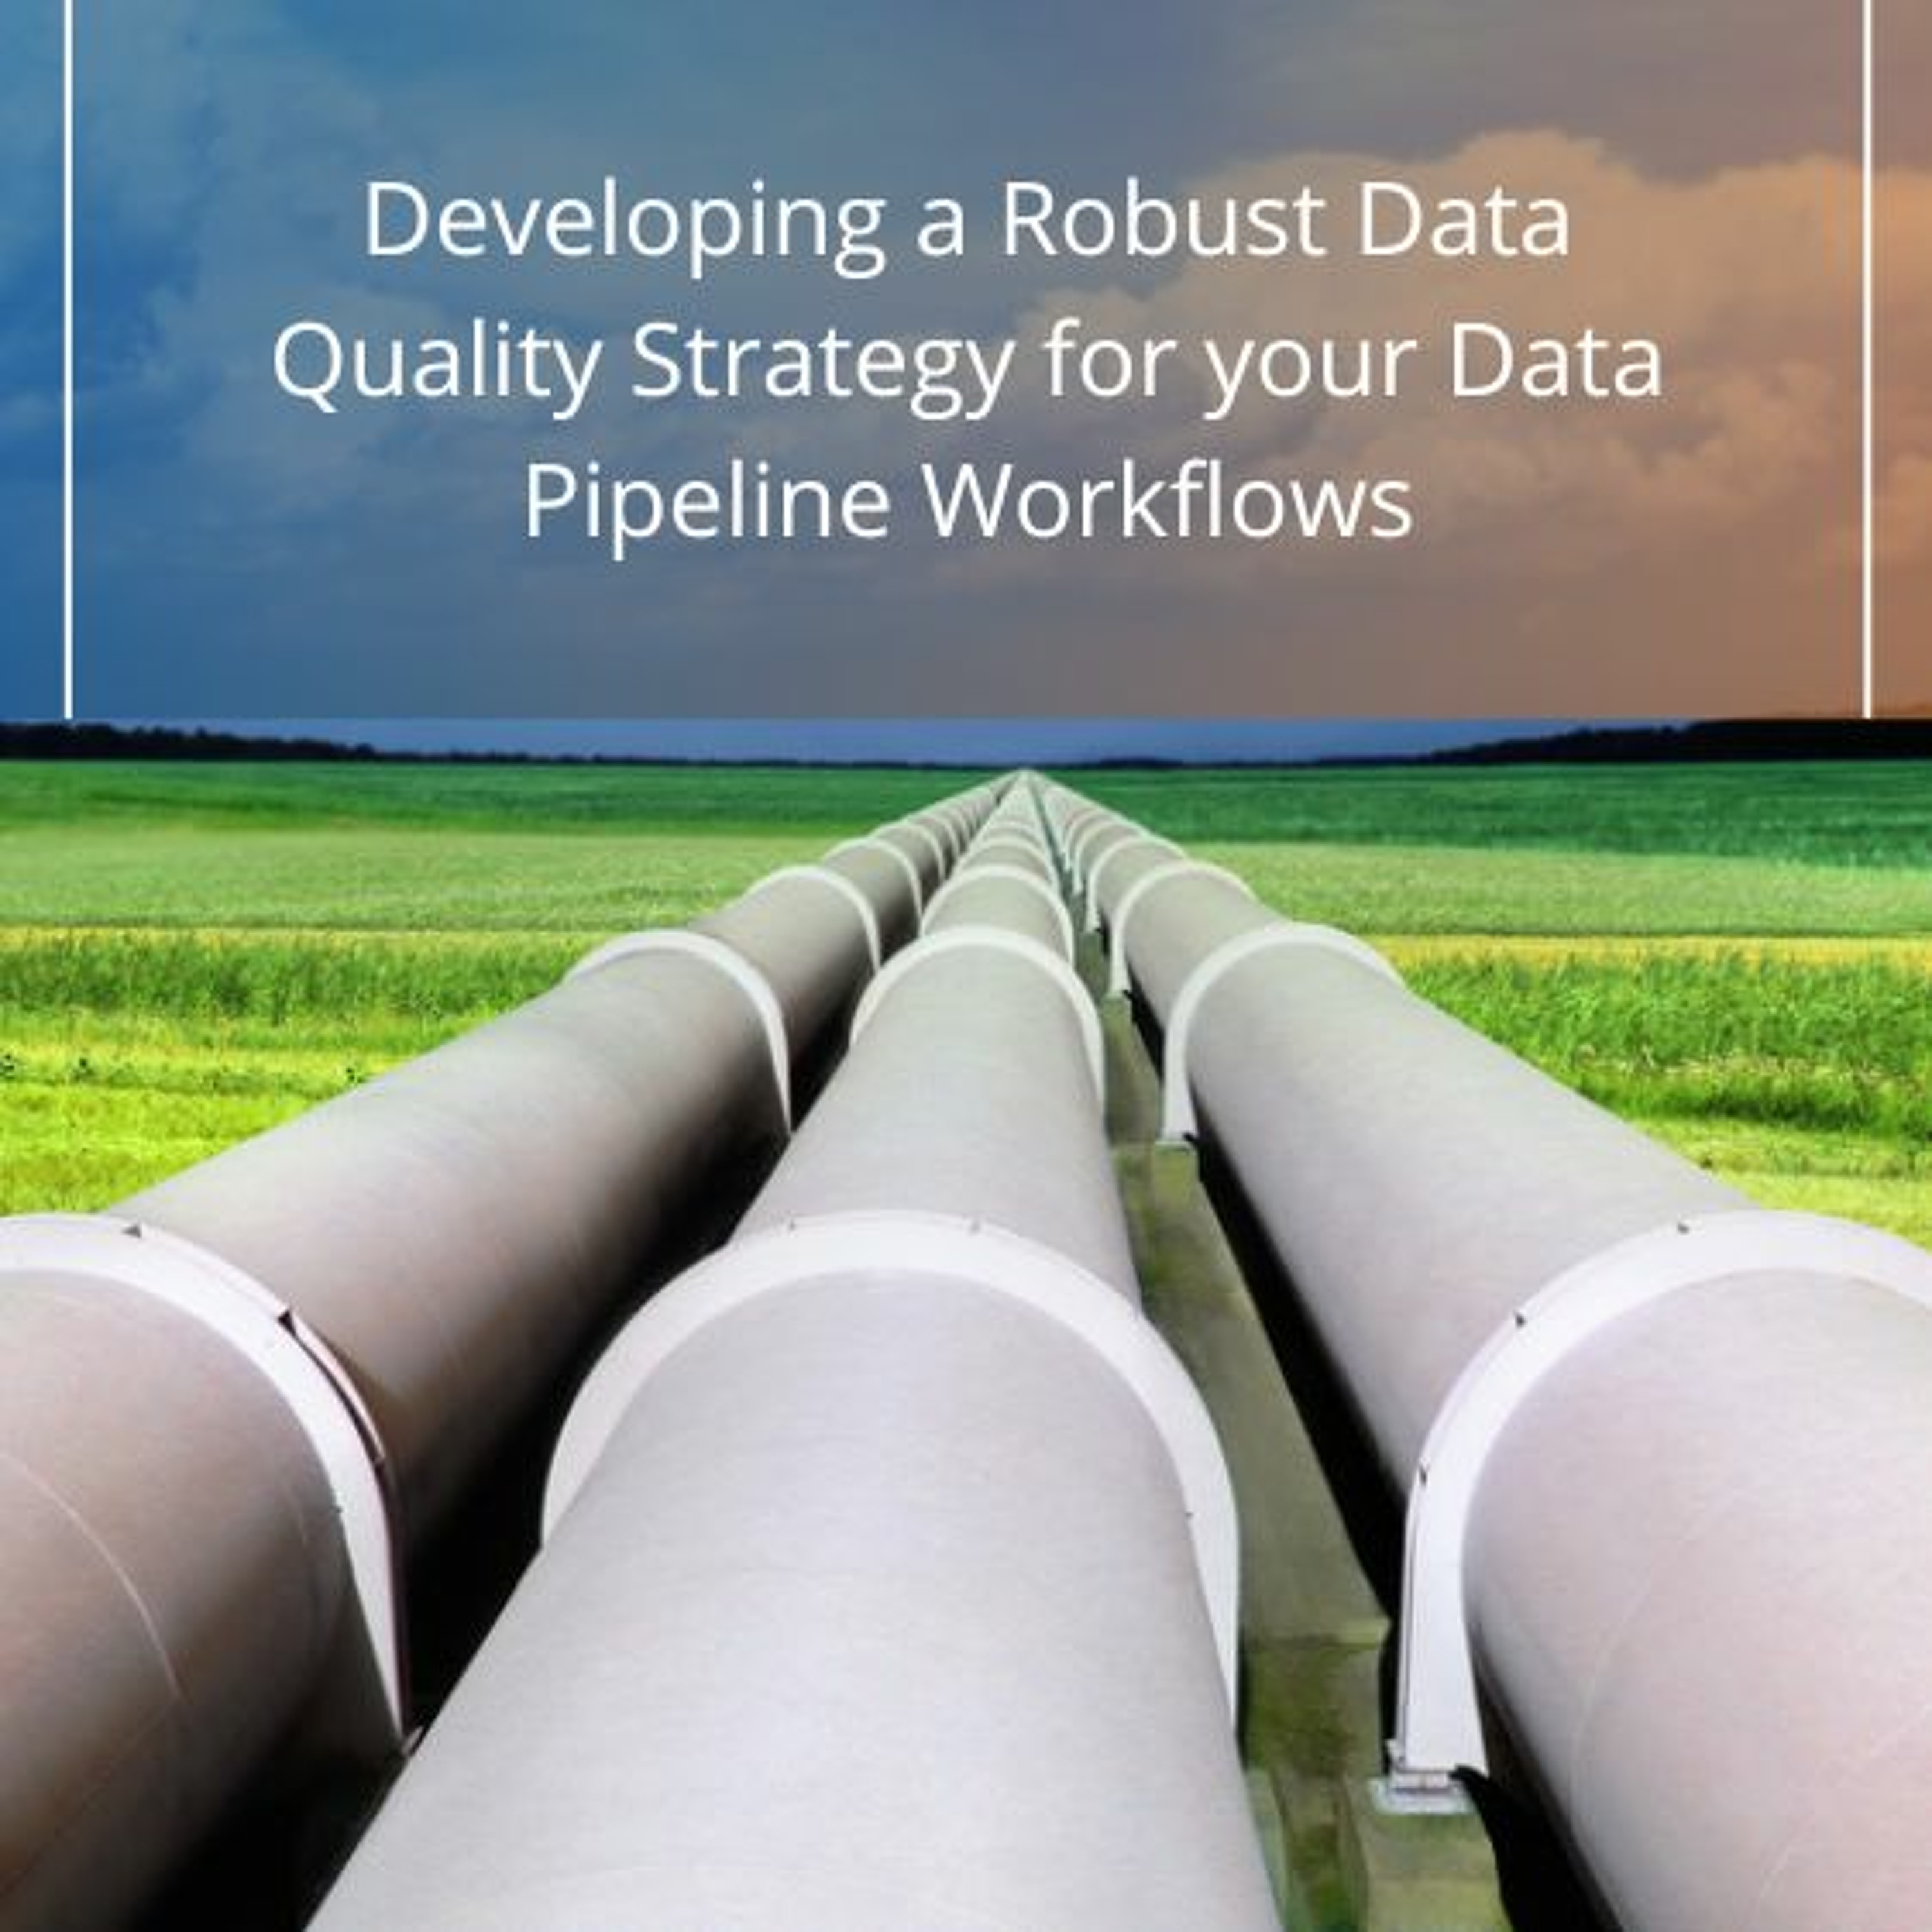 Developing a Robust Data Quality Strategy for Your Data Pipeline Workflows - Audio Blog